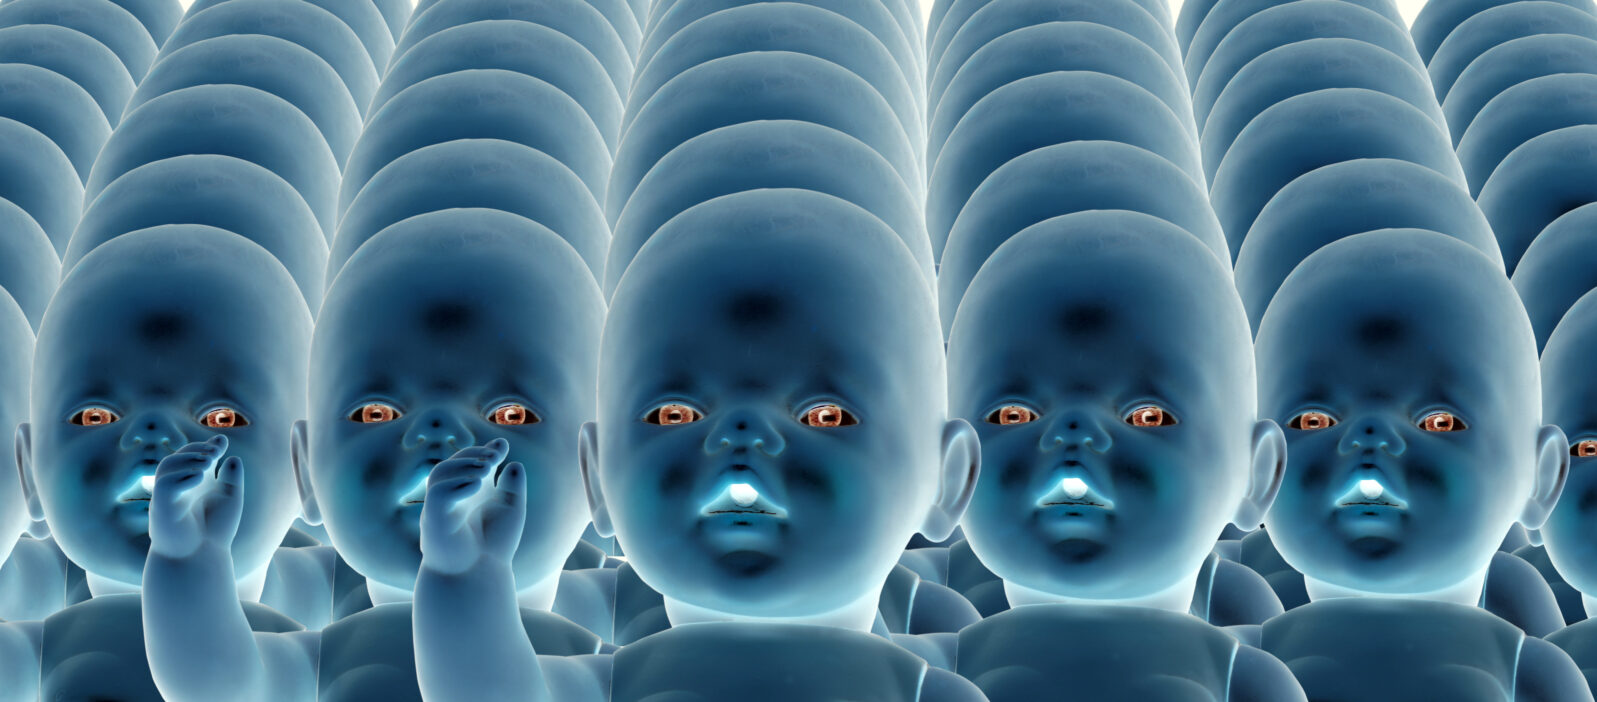 Show Me the Human Clones | Mind Matters